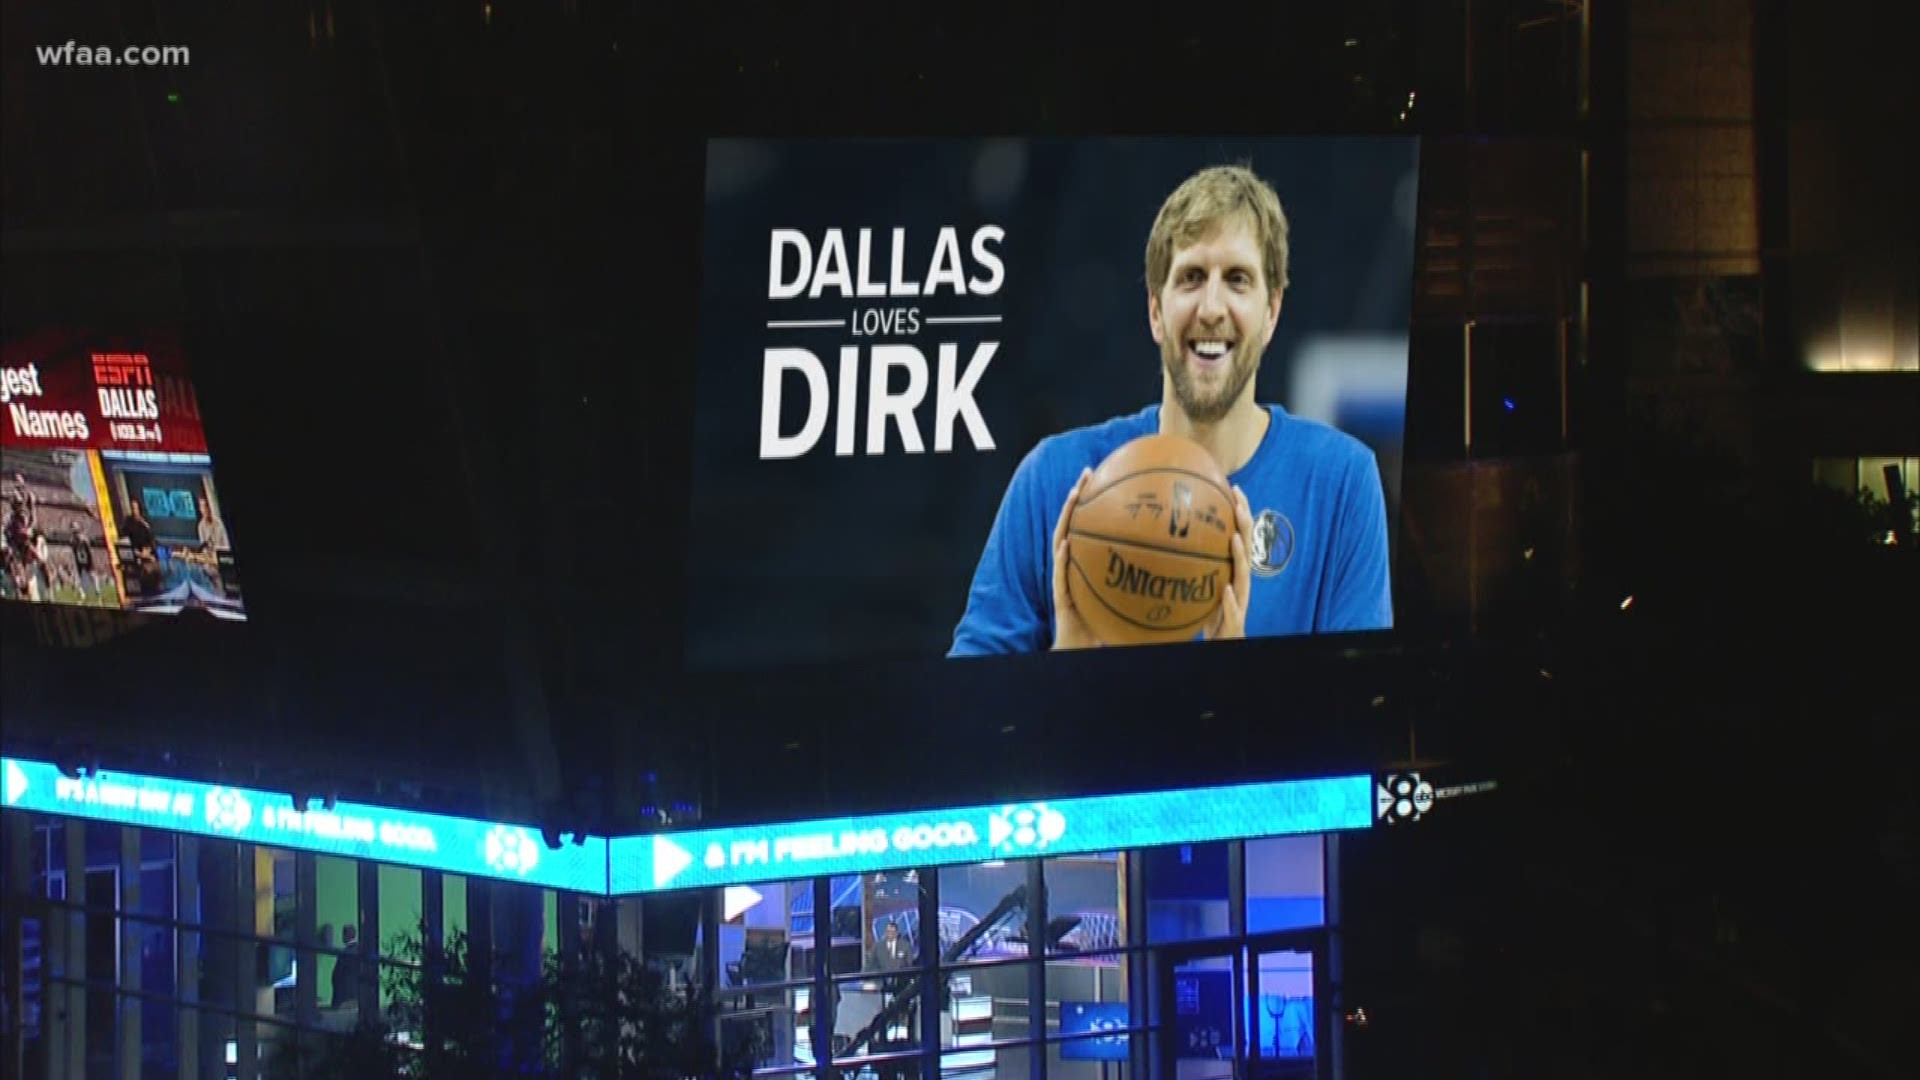 "My work is far from done here. This is my city," Dirk said.